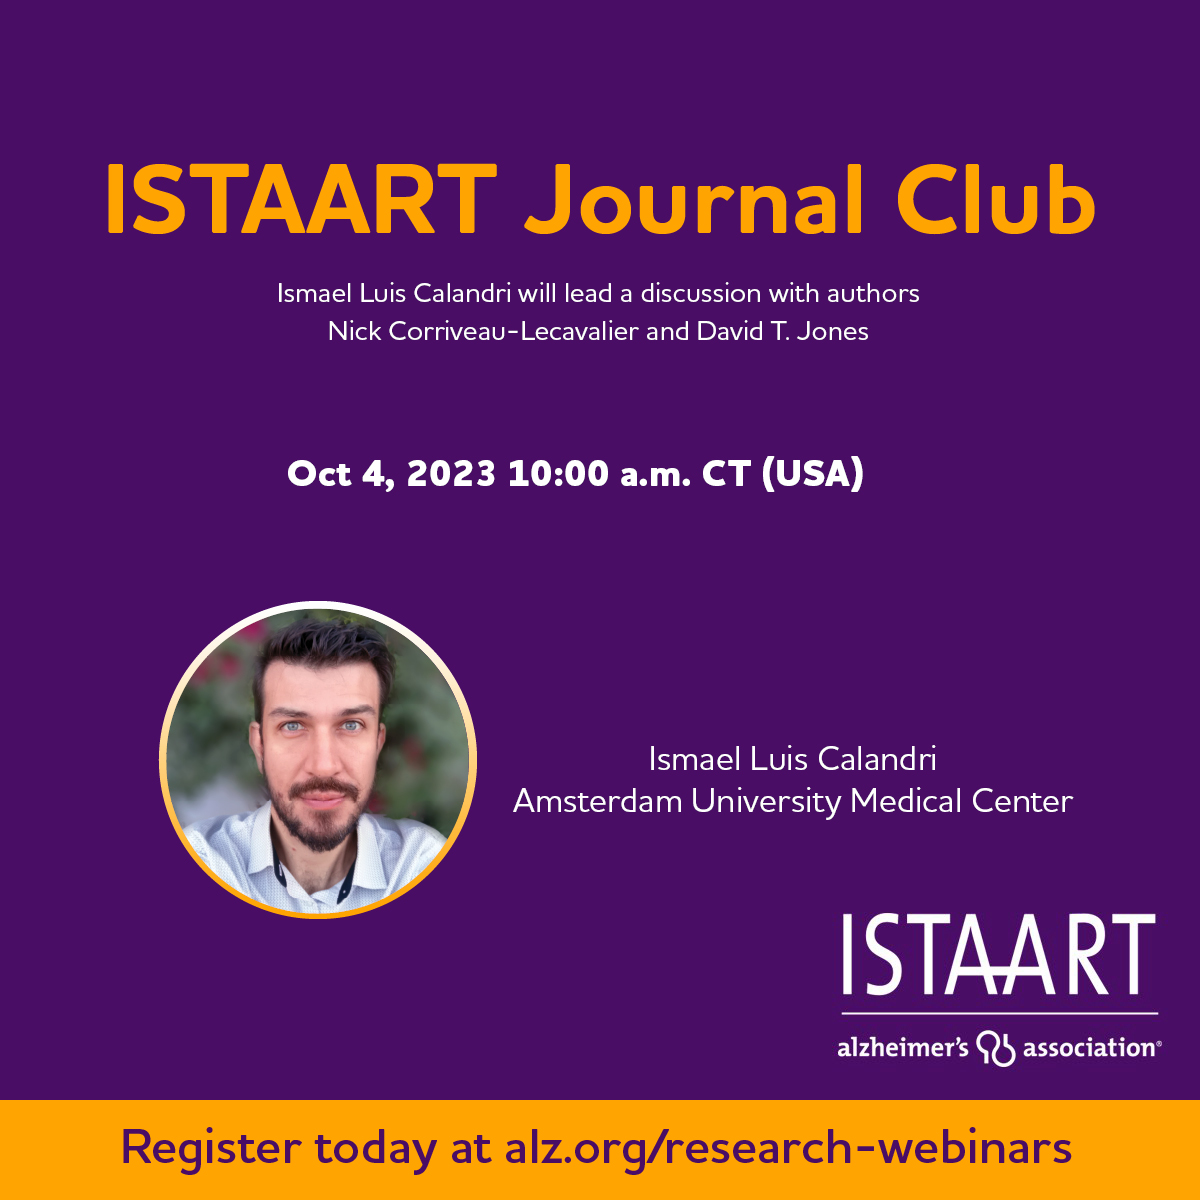 📢Kicking off a new iteration of @ISTAART journal club in two days organized by our newest executive member: @Colin__Groot! Join @IsmaelLCalandri in discussing latest science lead by authors @CorriveauNick and @DavidJonesBrain. 🔗Register here: alz-org.zoom.us/webinar/regist…